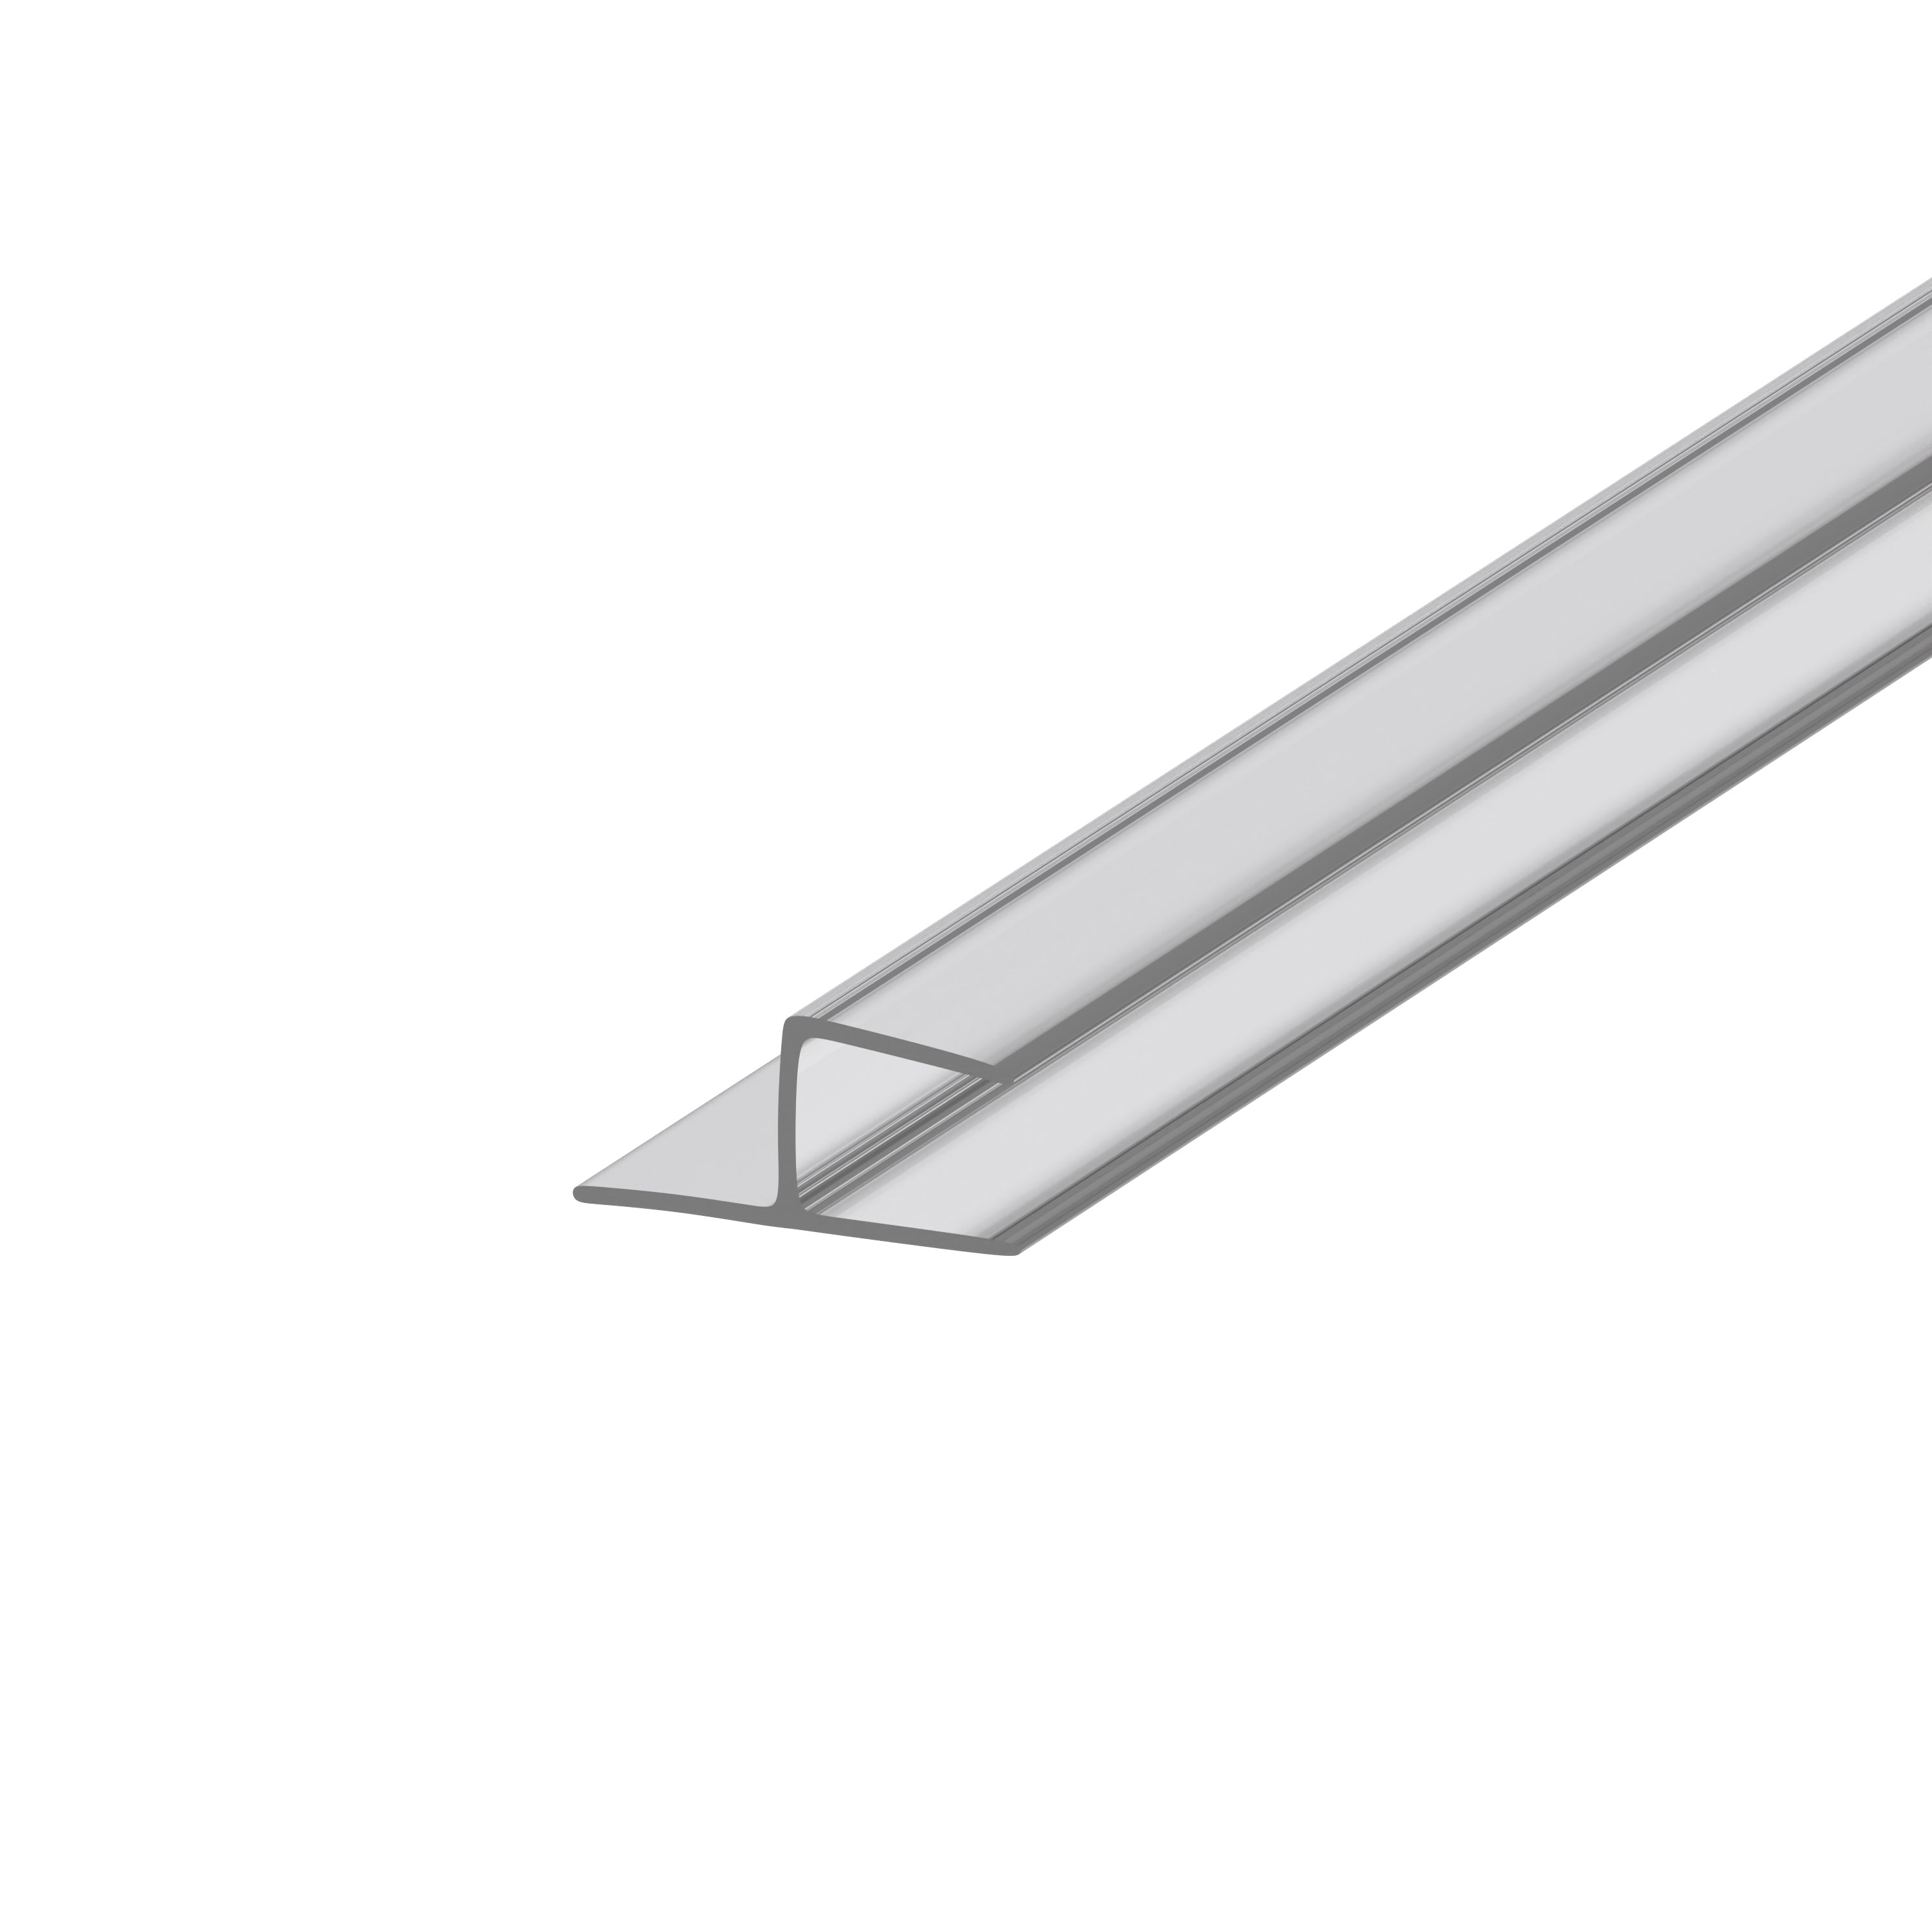 95” 180-Degree Polycarbonate H-Jamb for 3/8